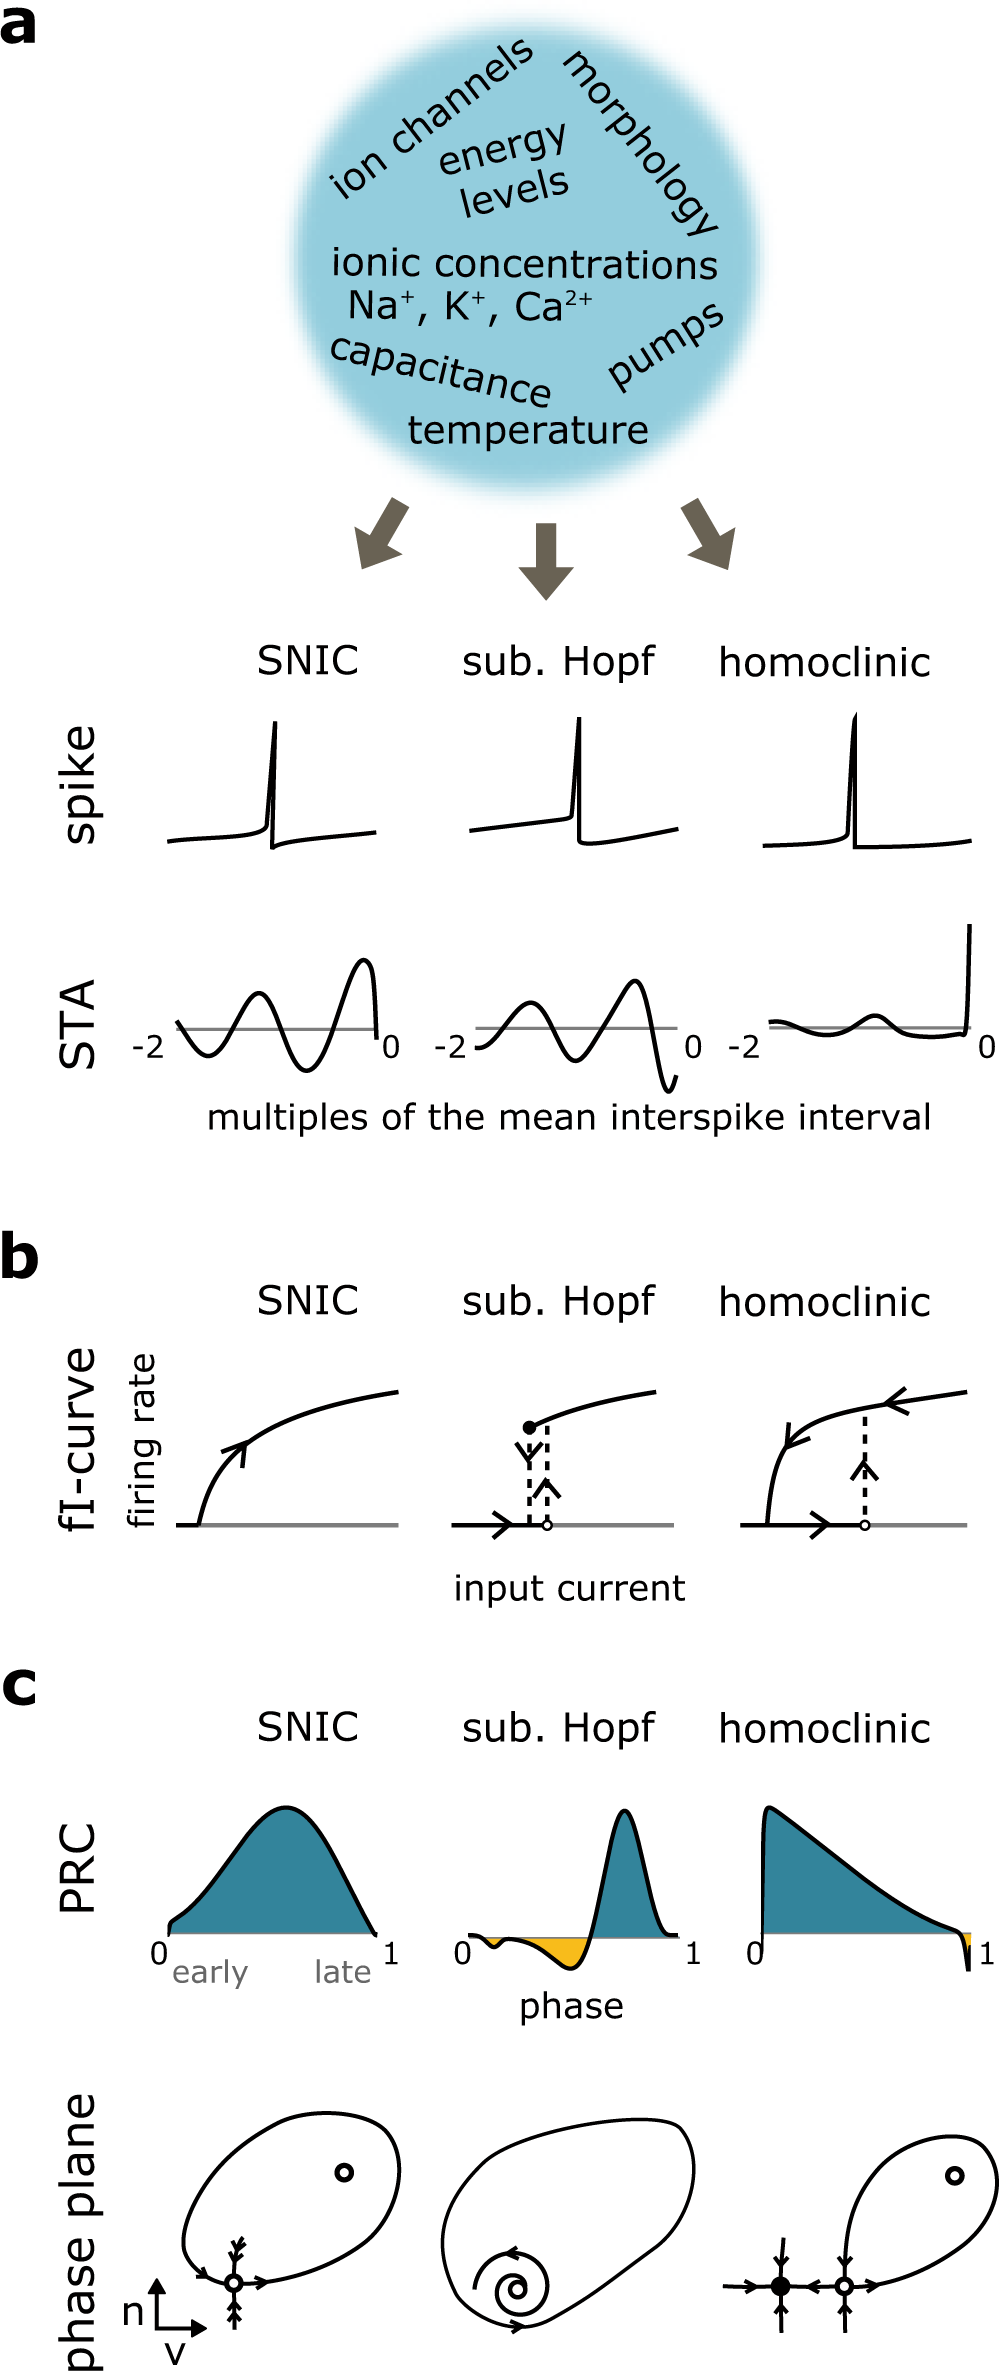 Temperature elevations can induce switches to homoclinic action potentials  that alter neural encoding and synchronization | Nature Communications